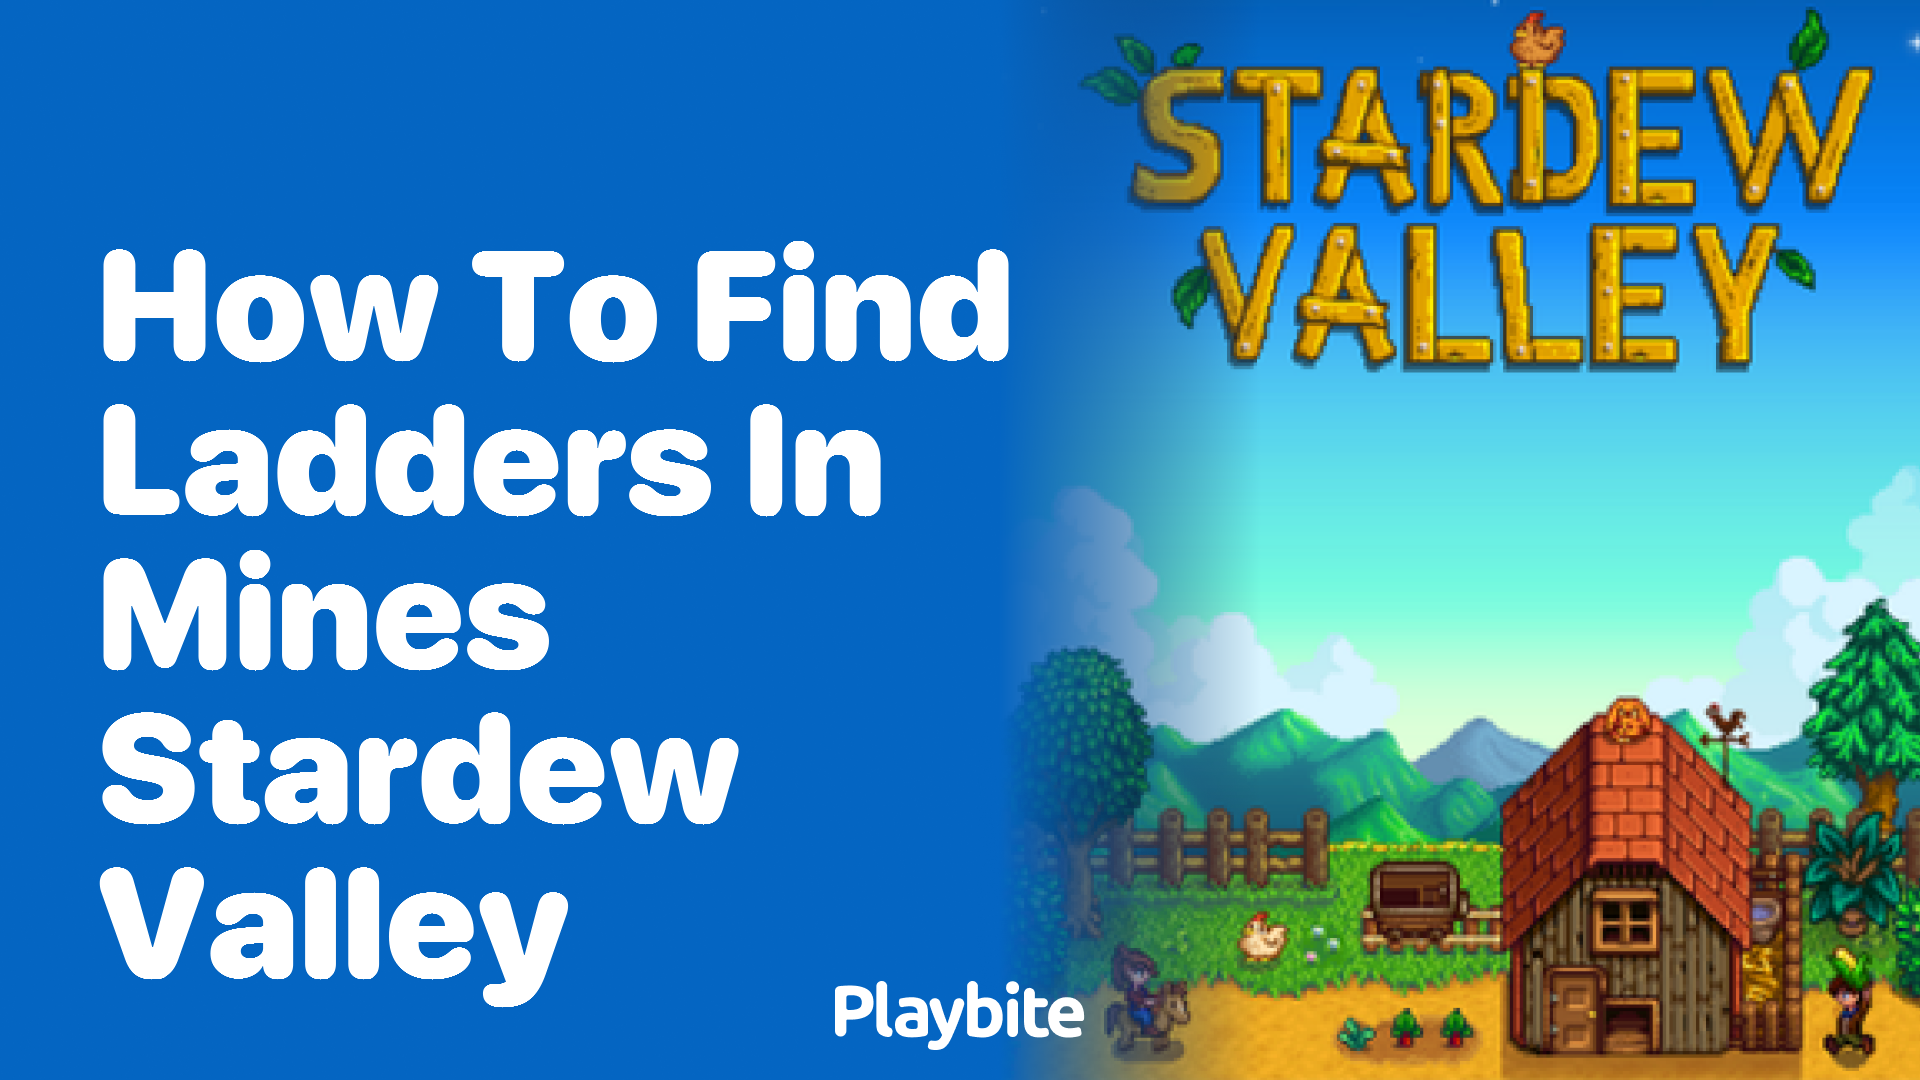 How to Find Ladders in Mines Stardew Valley